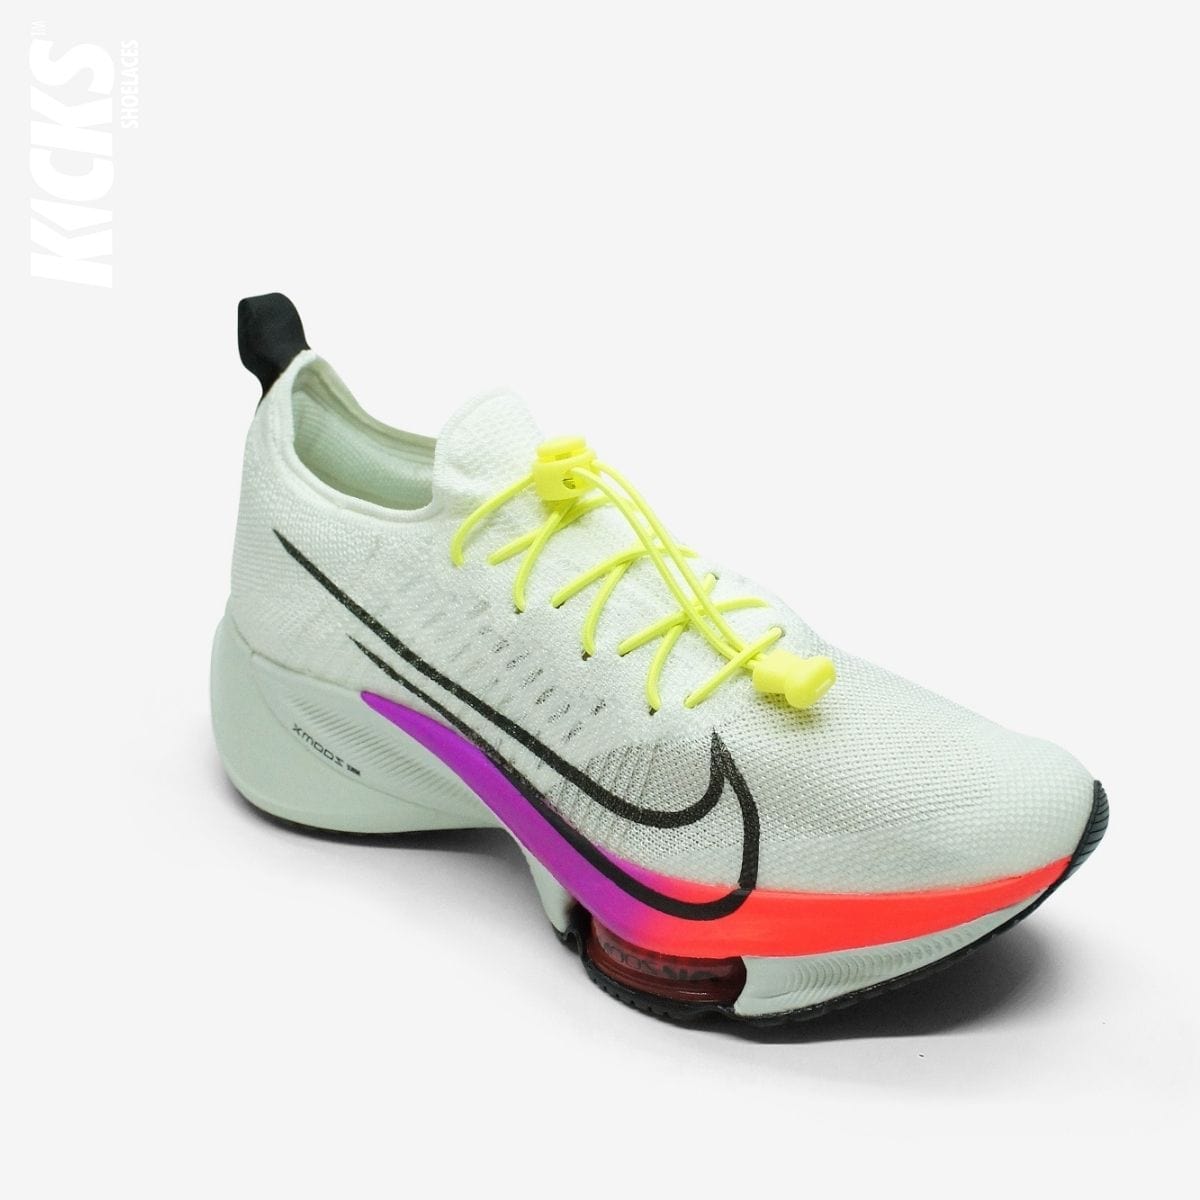 quick-laces-with-fluorescent-yellow-elastic-no-tie-shoelaces-on-nike-running-shoe-by-kicks-shoelaces